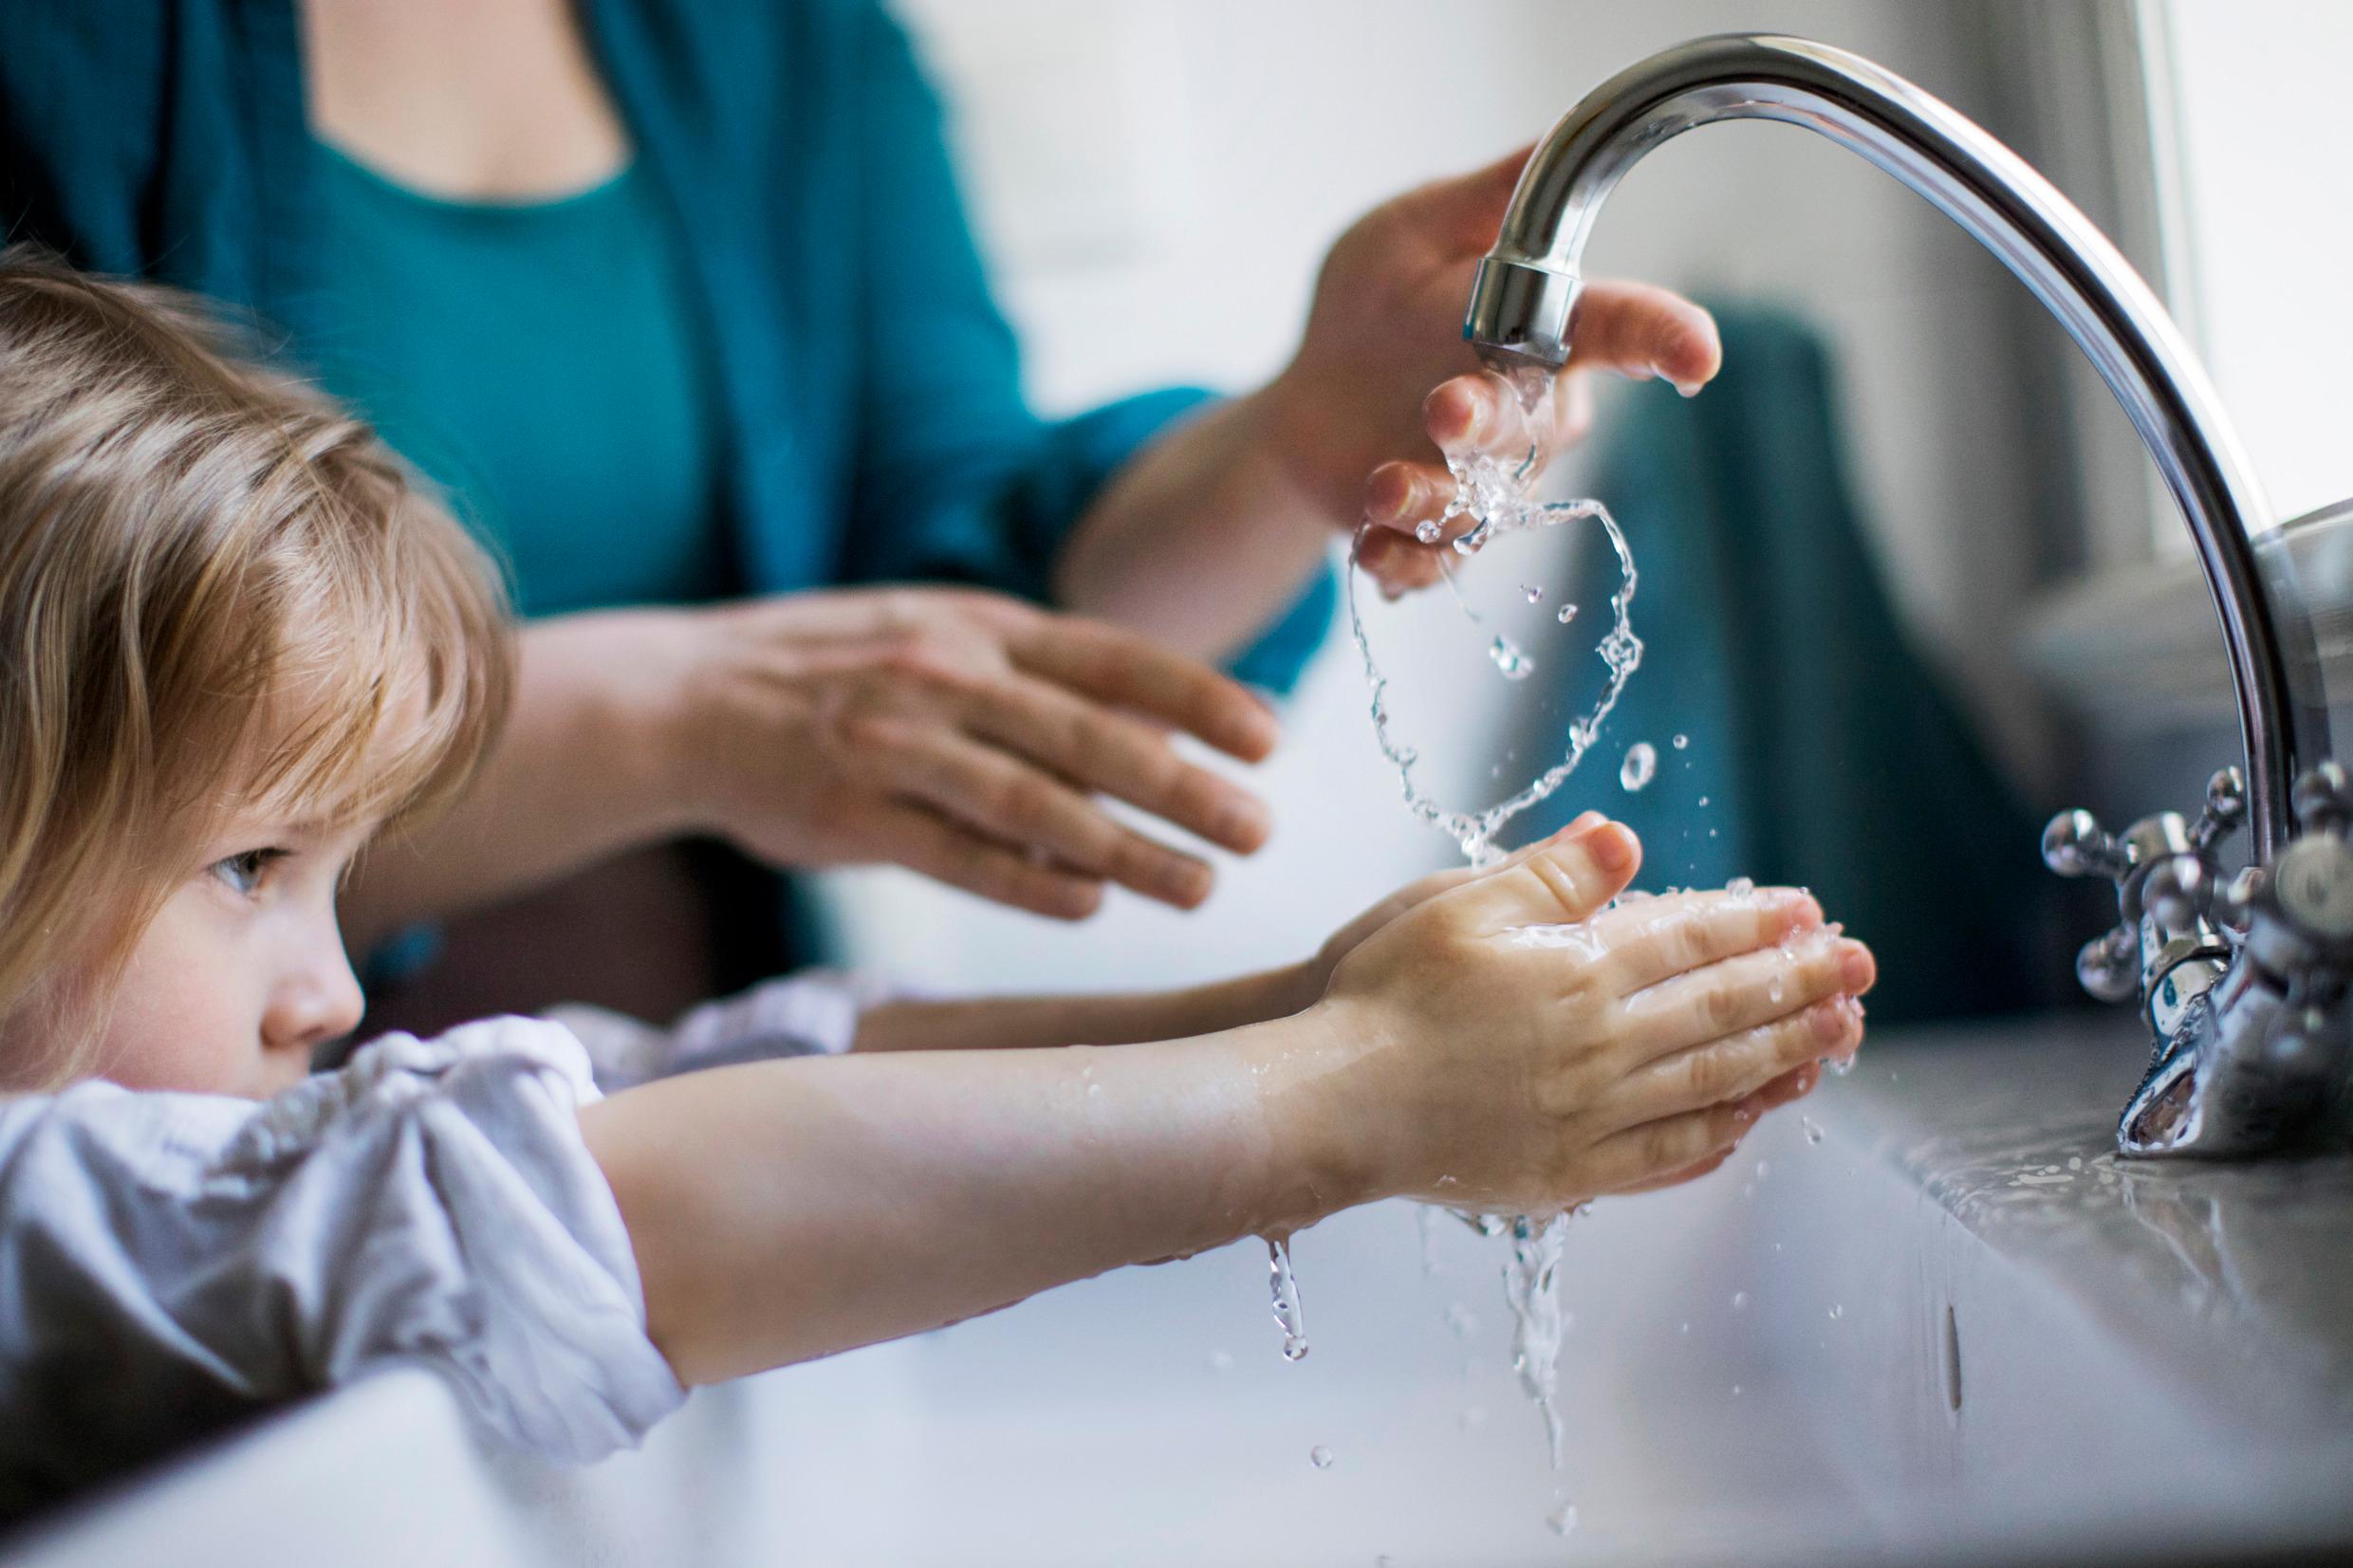 A young girl is washing her hands under a running faucet.